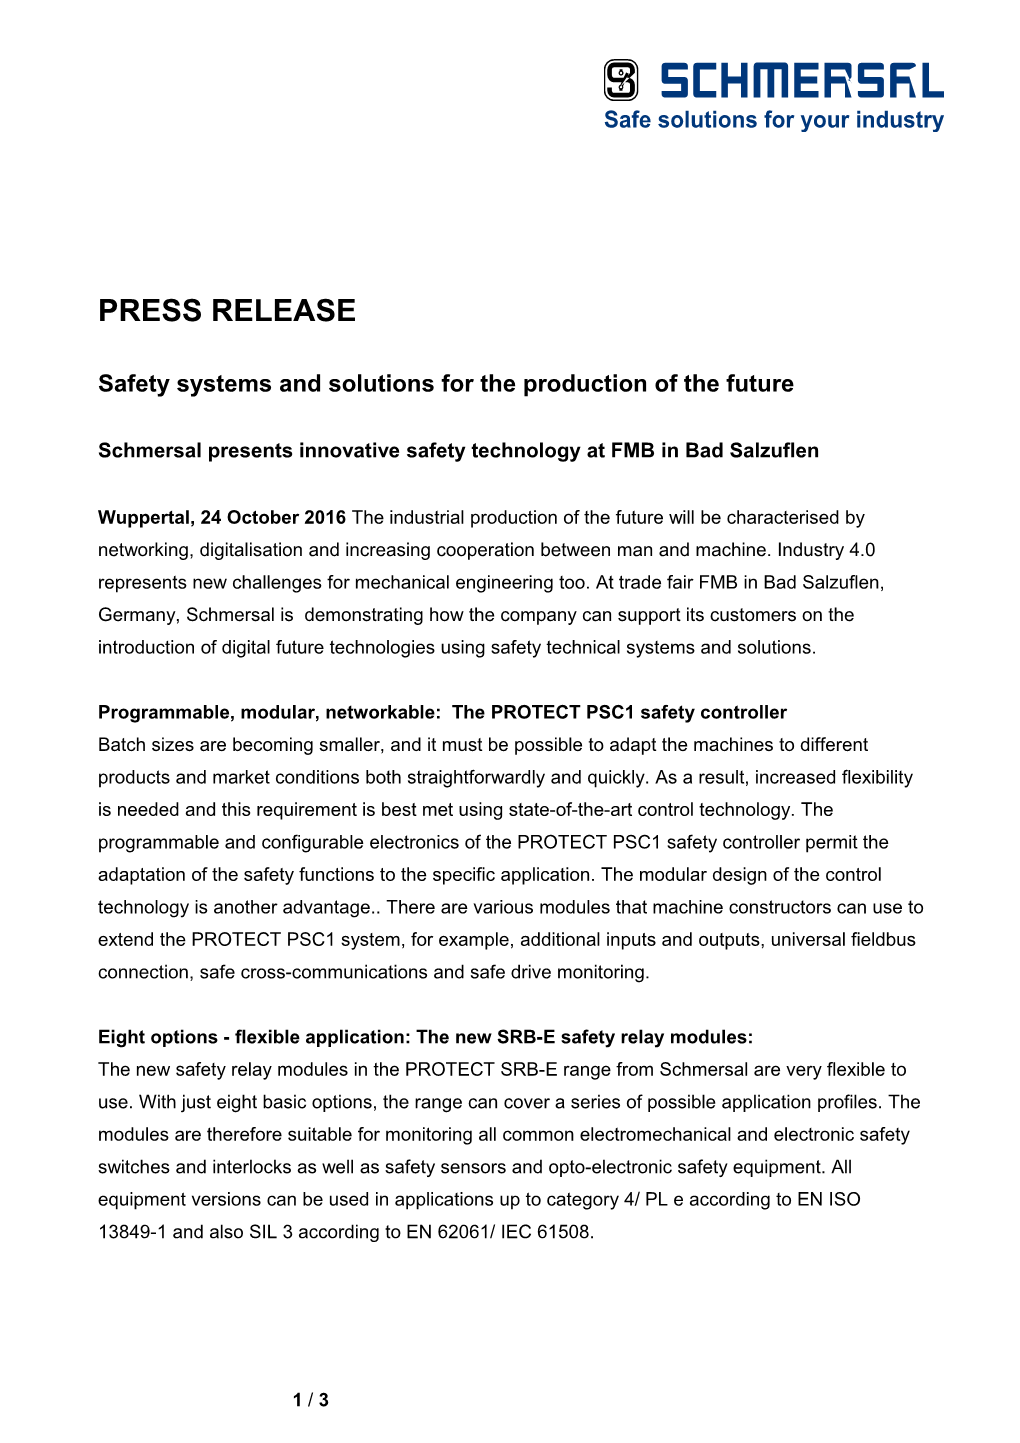 Safety Systems and Solutions for the Production of the Future